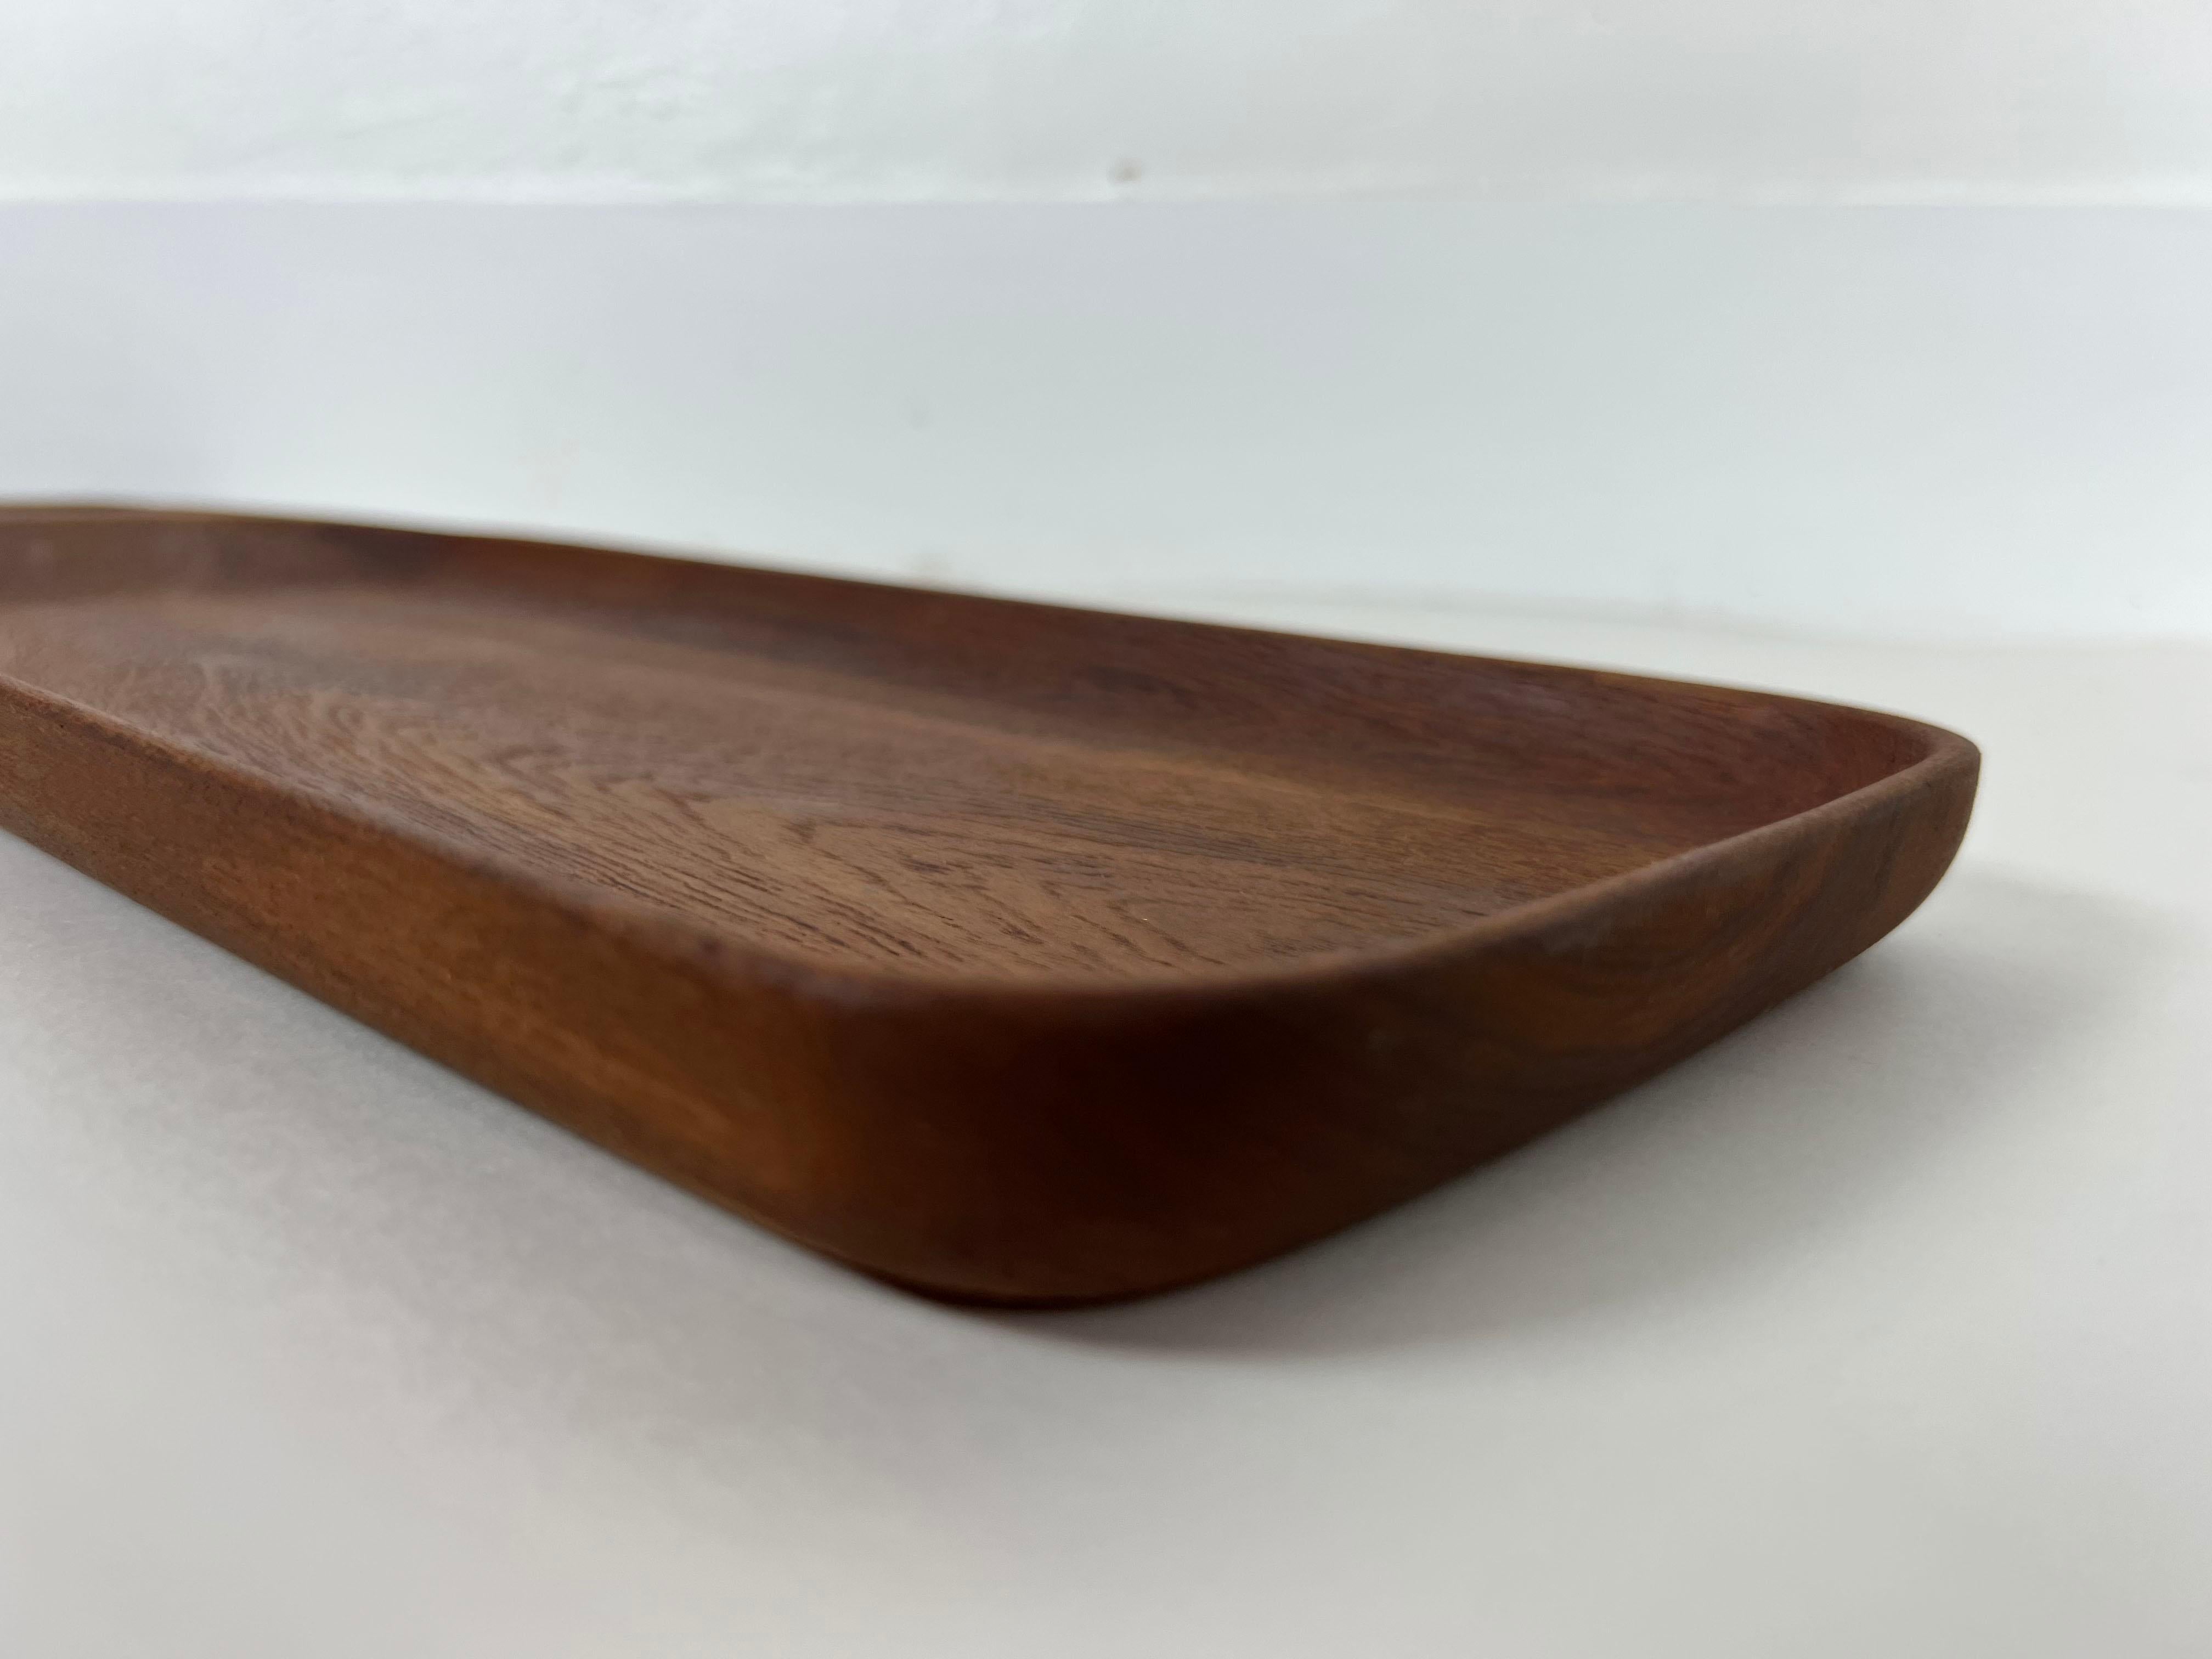 Danish Teak Tray with Handle by Bonniers In Excellent Condition For Sale In Fort Lauderdale, FL